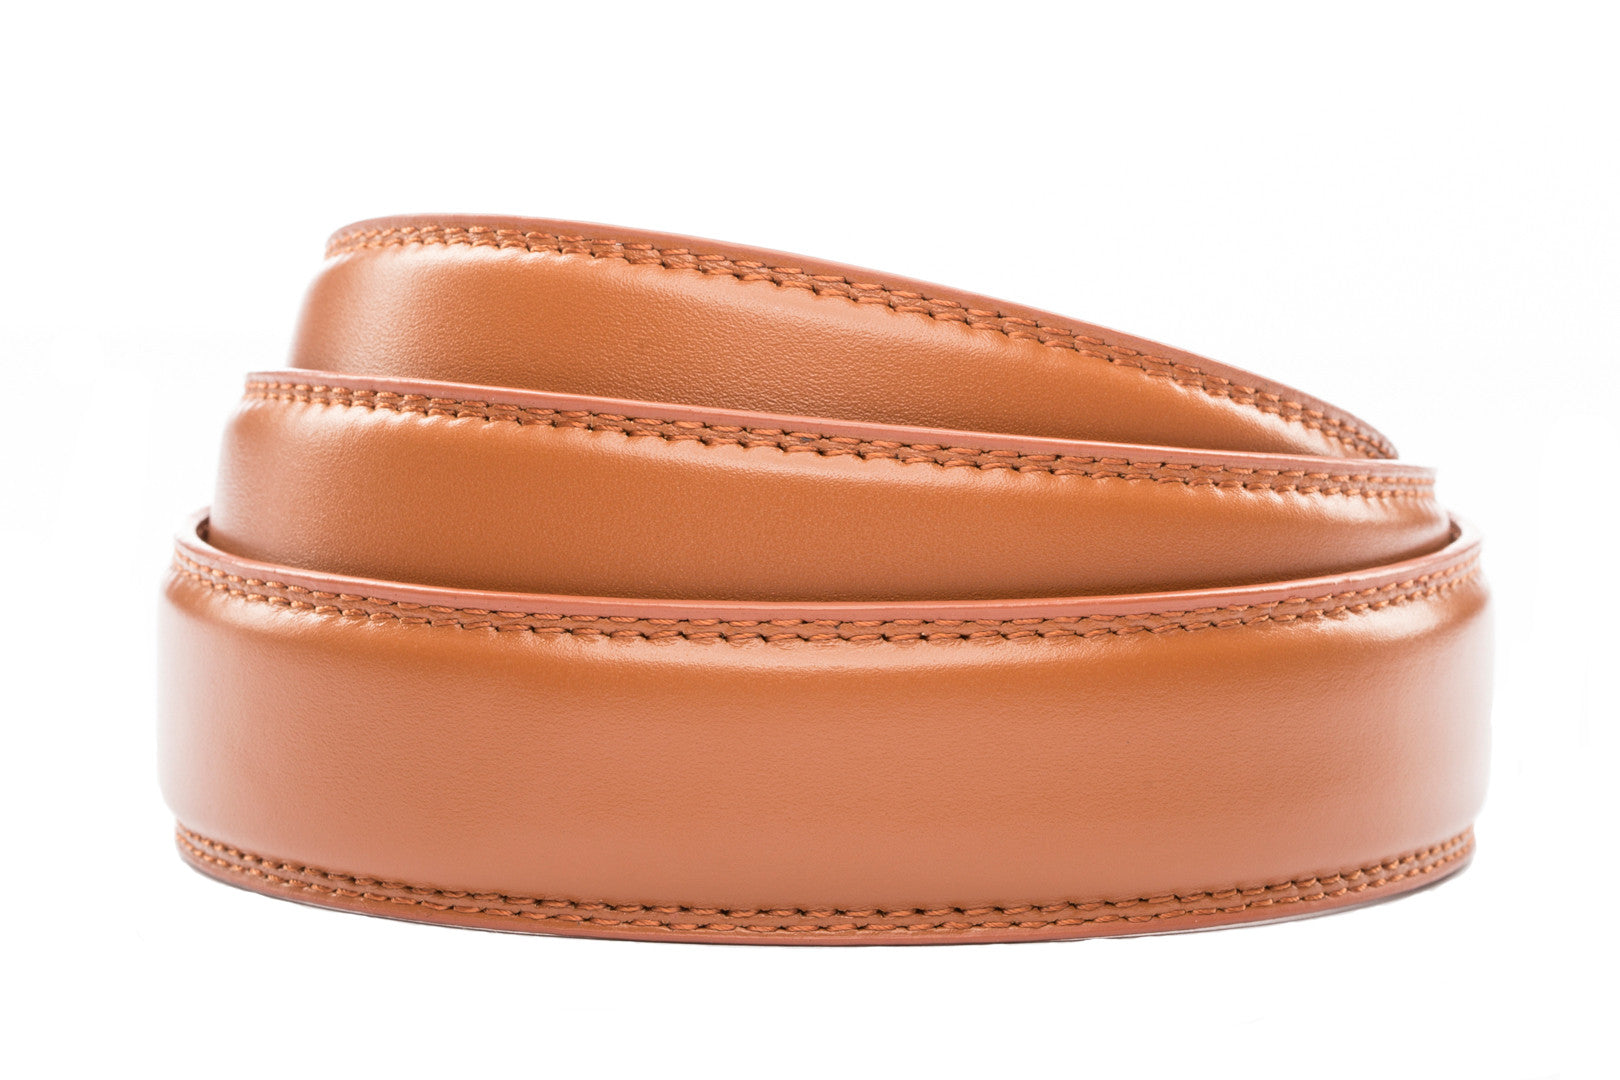 Men's leather belt strap in saddle tan with a 1.25-inch width, formal look